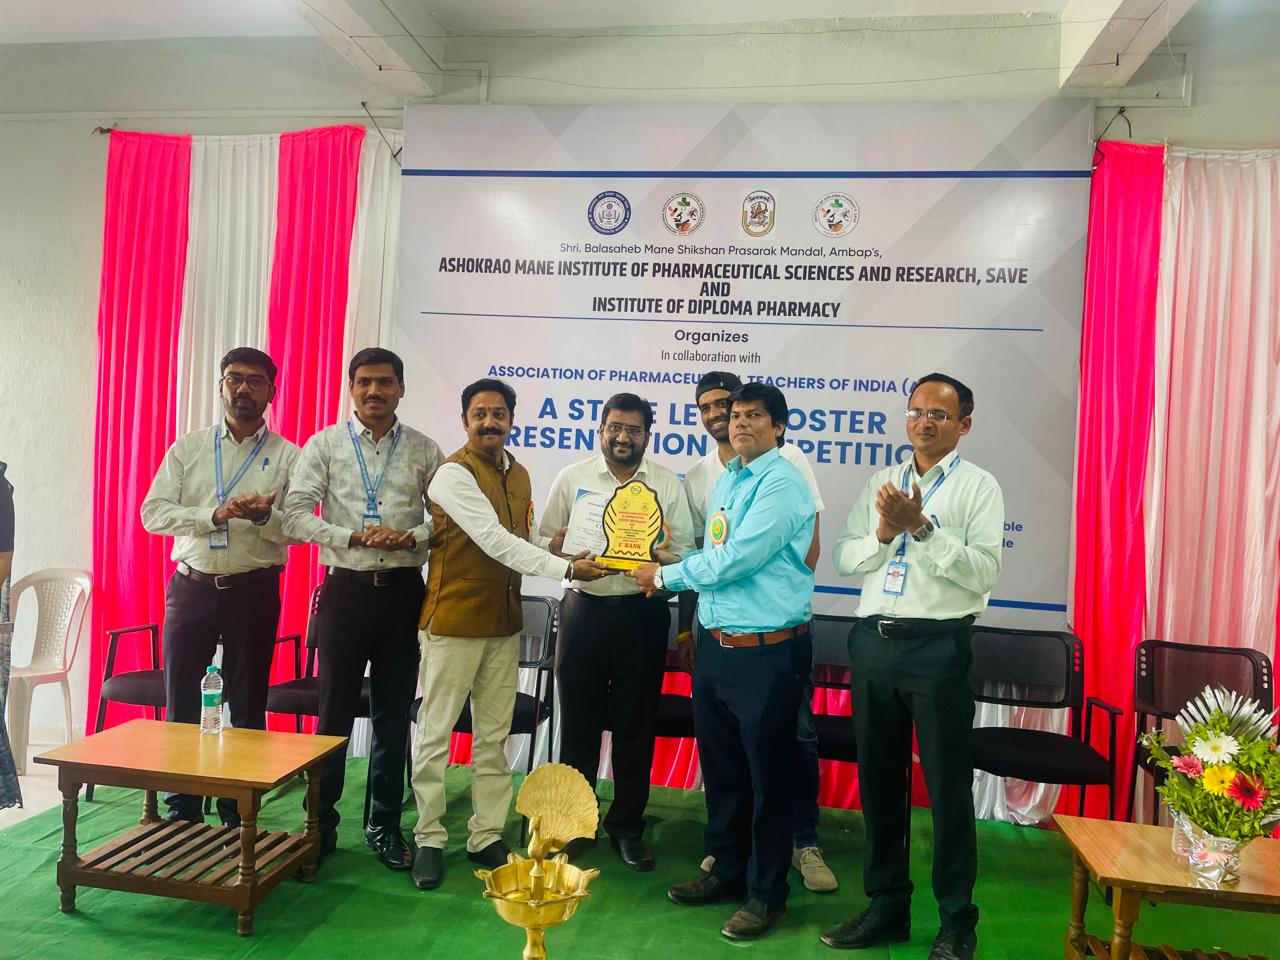 Won First Prize in State Level Poster Presentation Competition (Diploma Faculty Category)